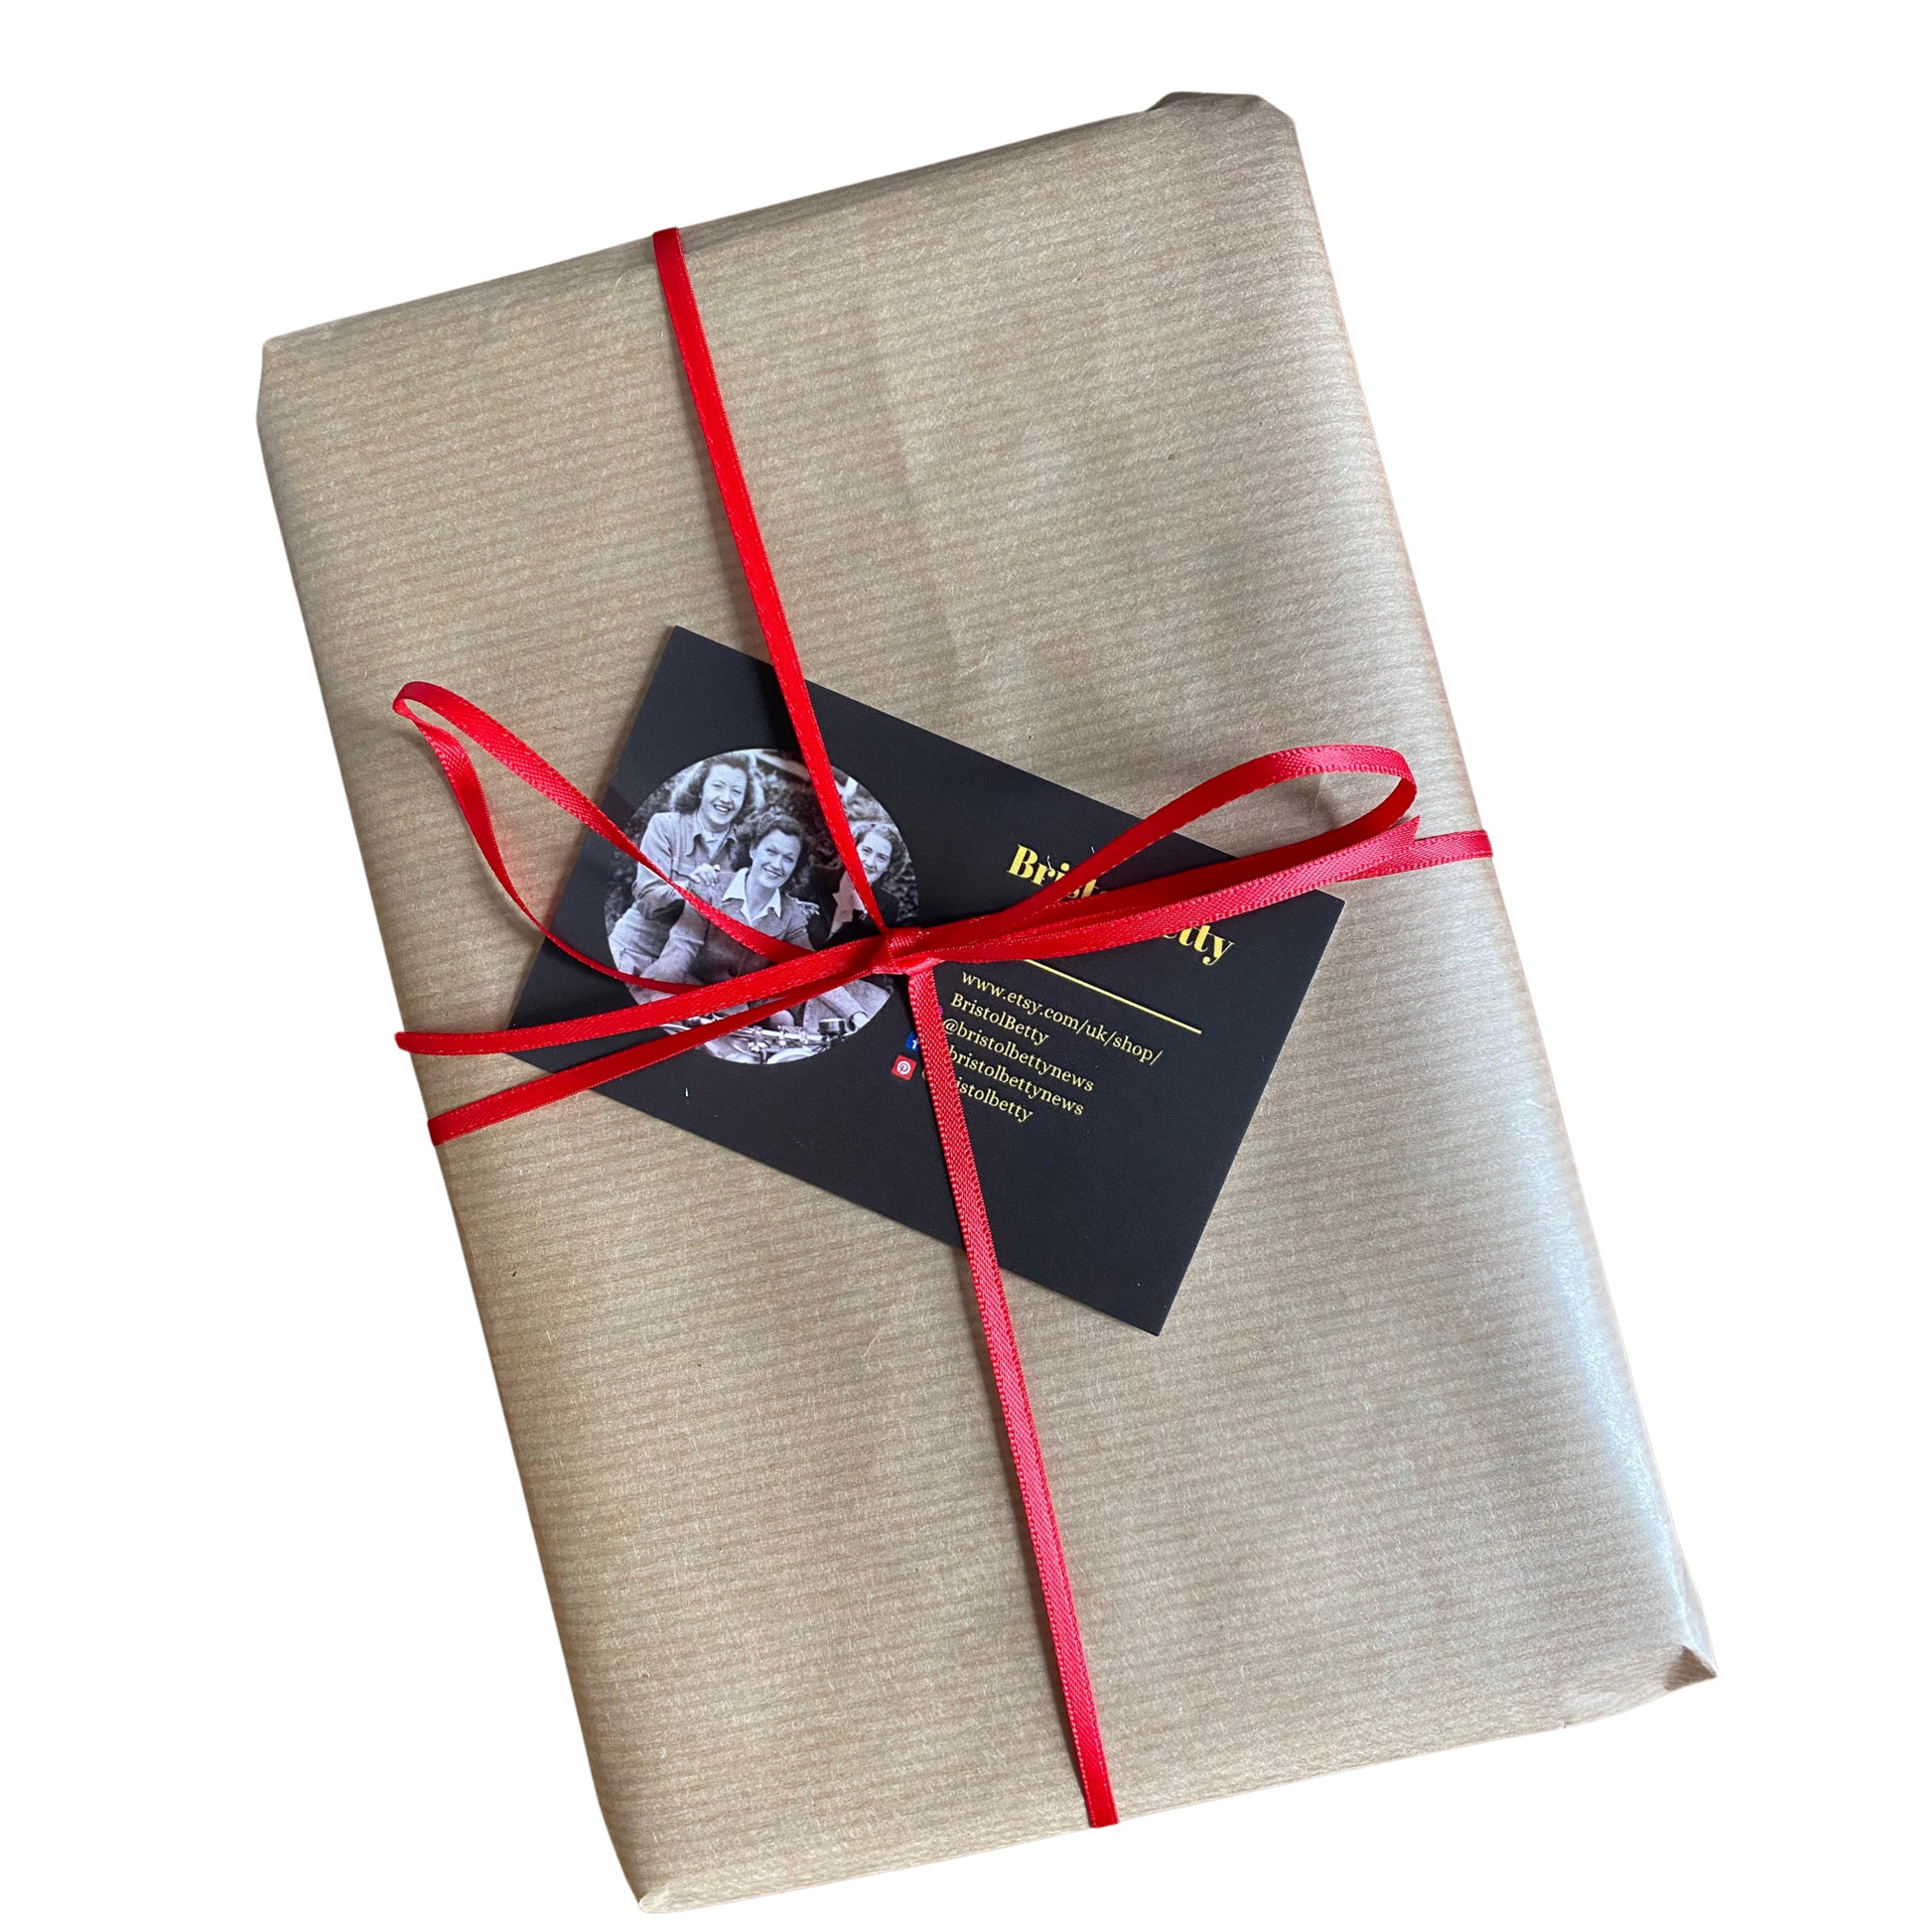 Great gift idea. All books are gift wrapped in Kraft paper and ribbon 